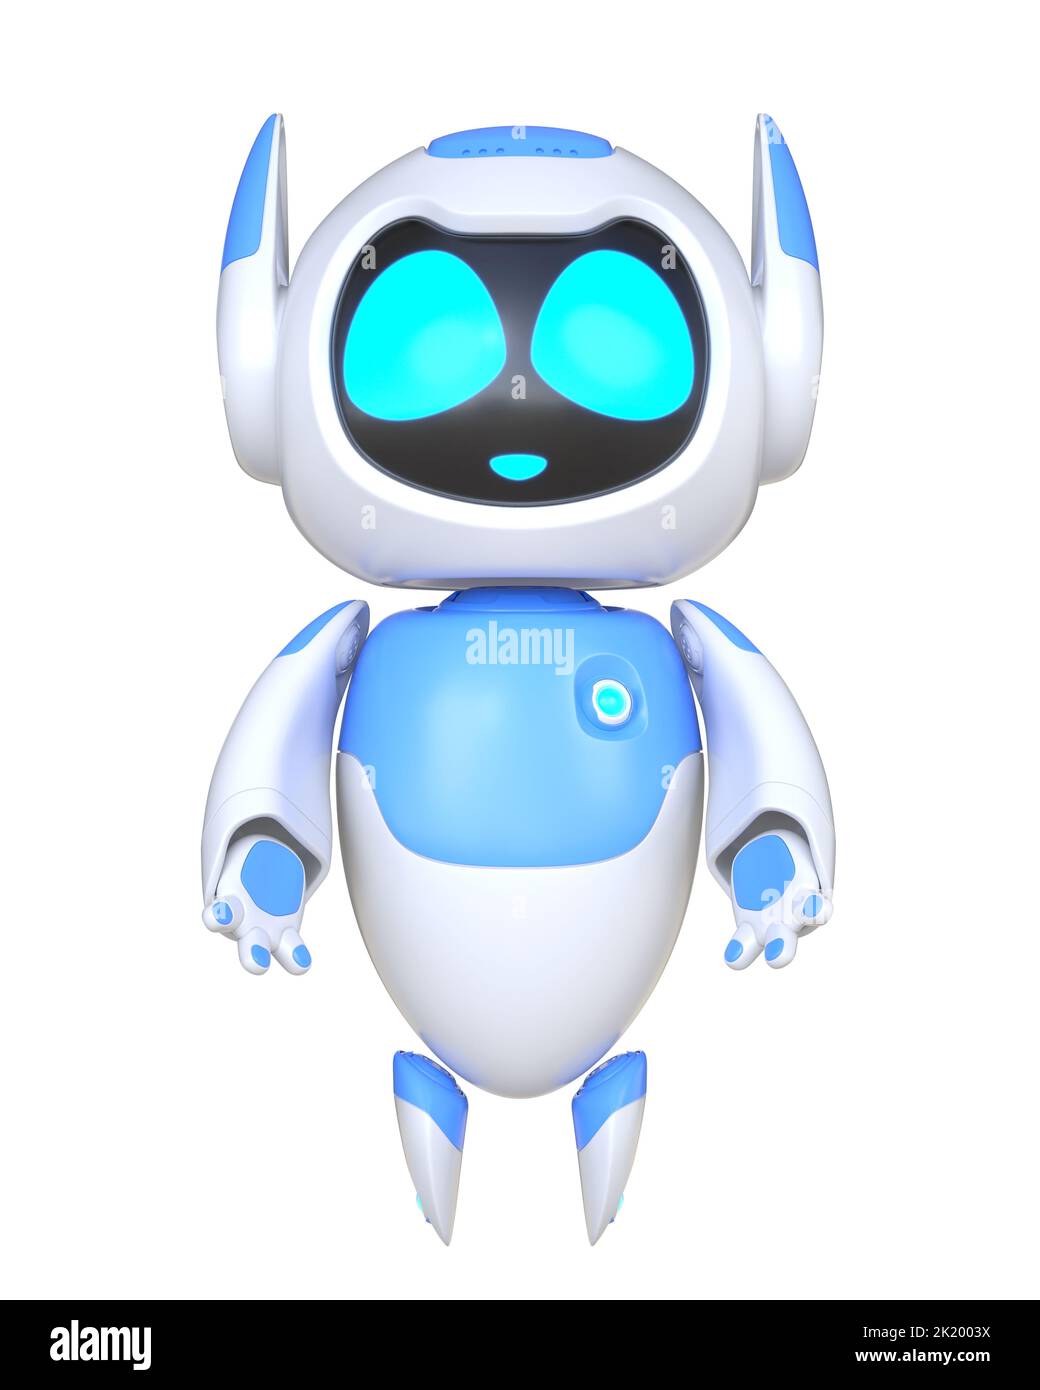 Chatbot character for support service concept. 3D illustration Stock Photo